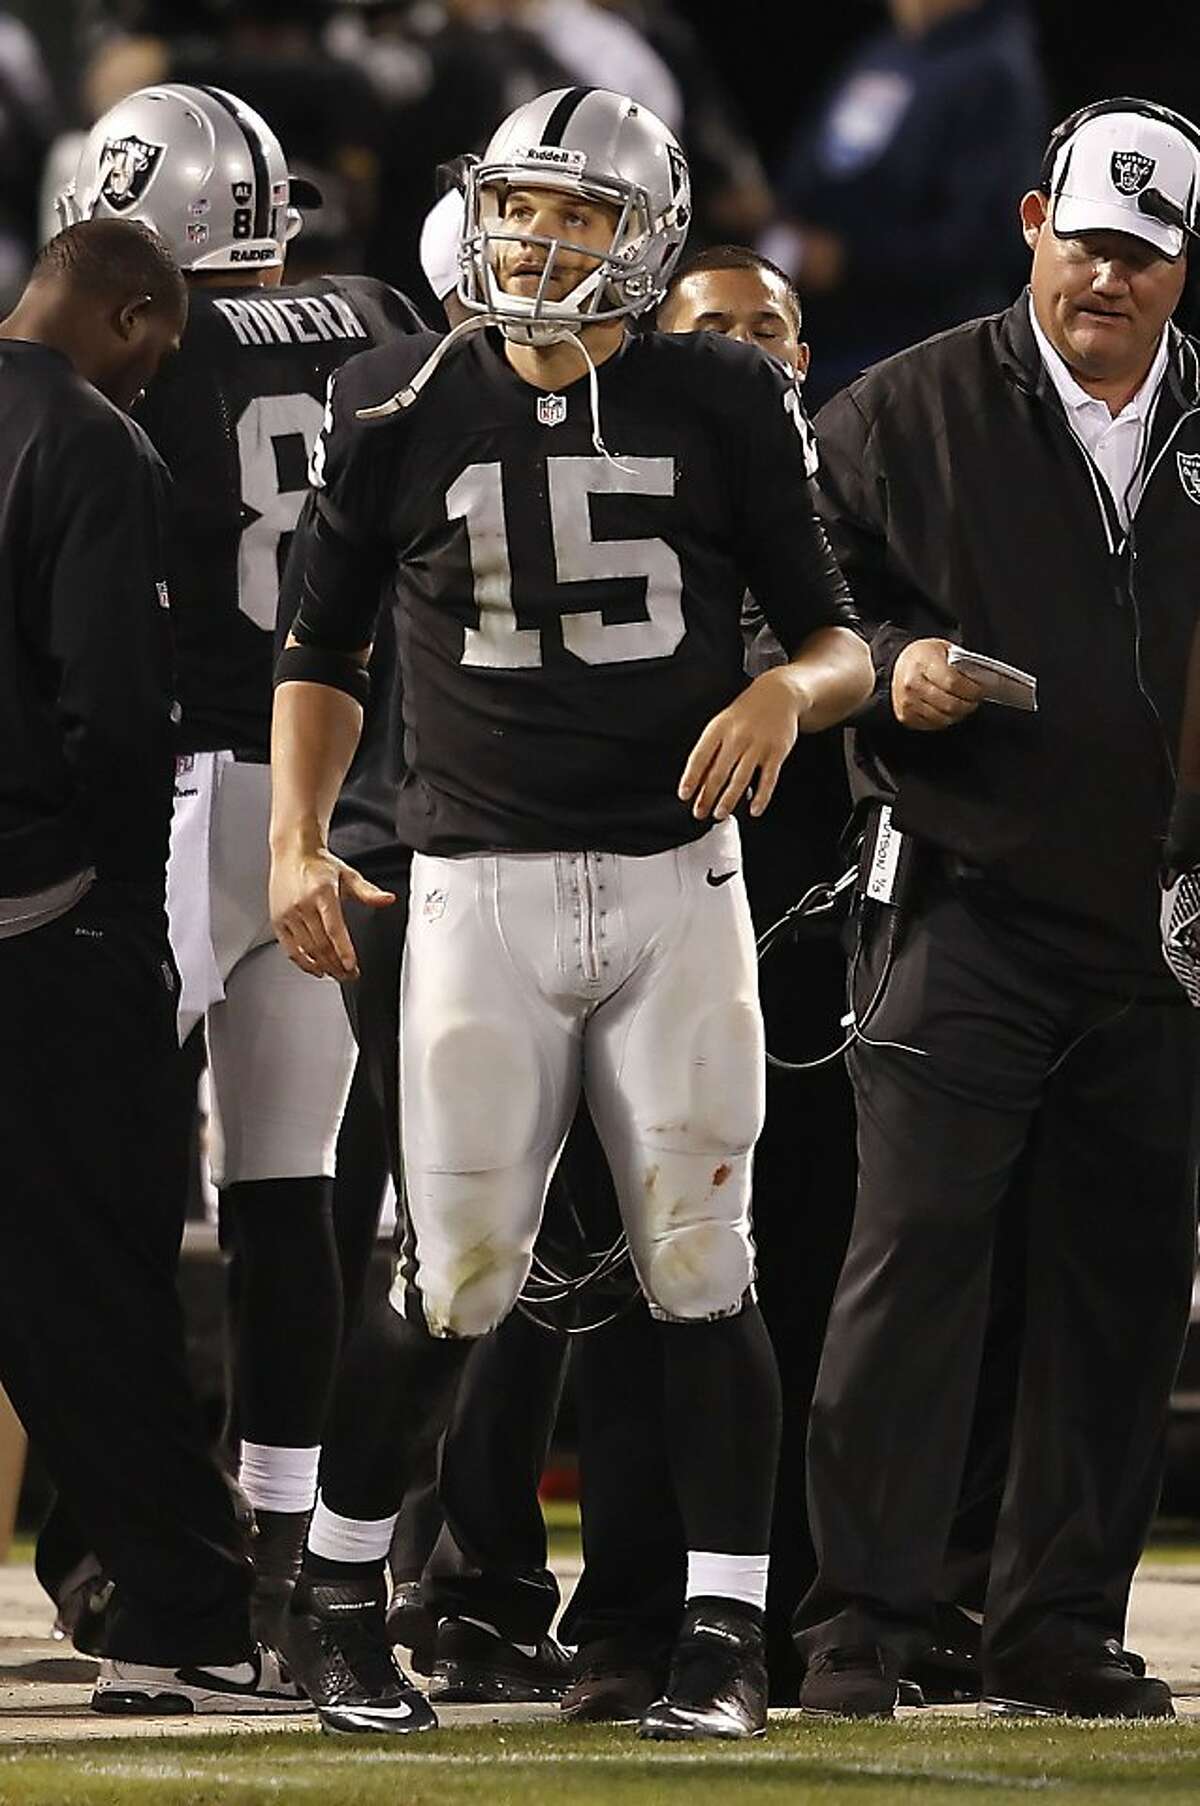 Raiders' quarterback Matt Flynn, (15) sat out the second half, as the Oakland Raiders take on the Chicago Bears in a pre-season game at the O.co Coliseum in Oakland, Calif. on Friday August 32, 2013.